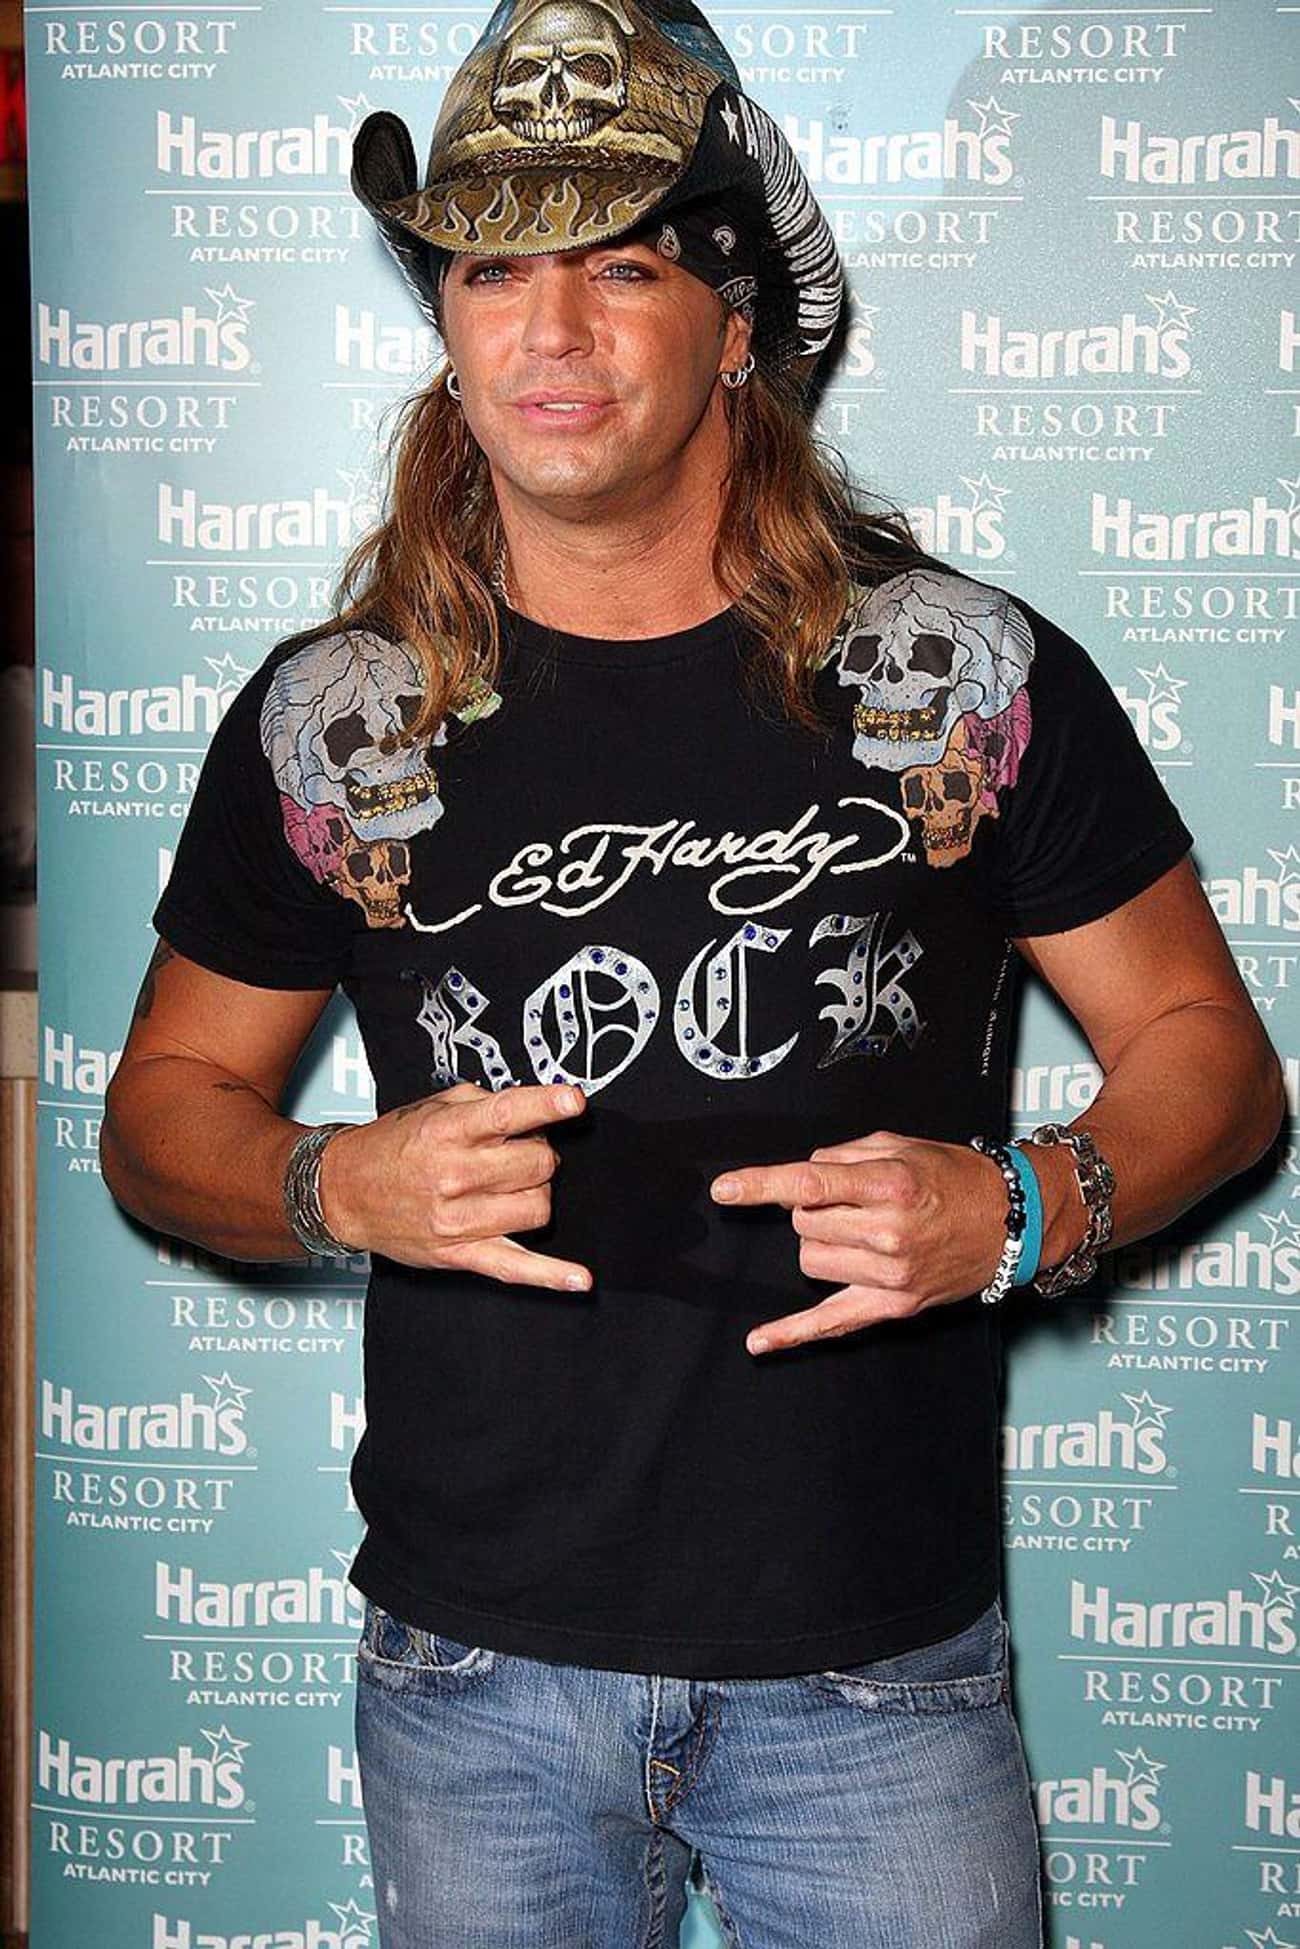 Bret Michaels At A Party In Atlantic City, 2008